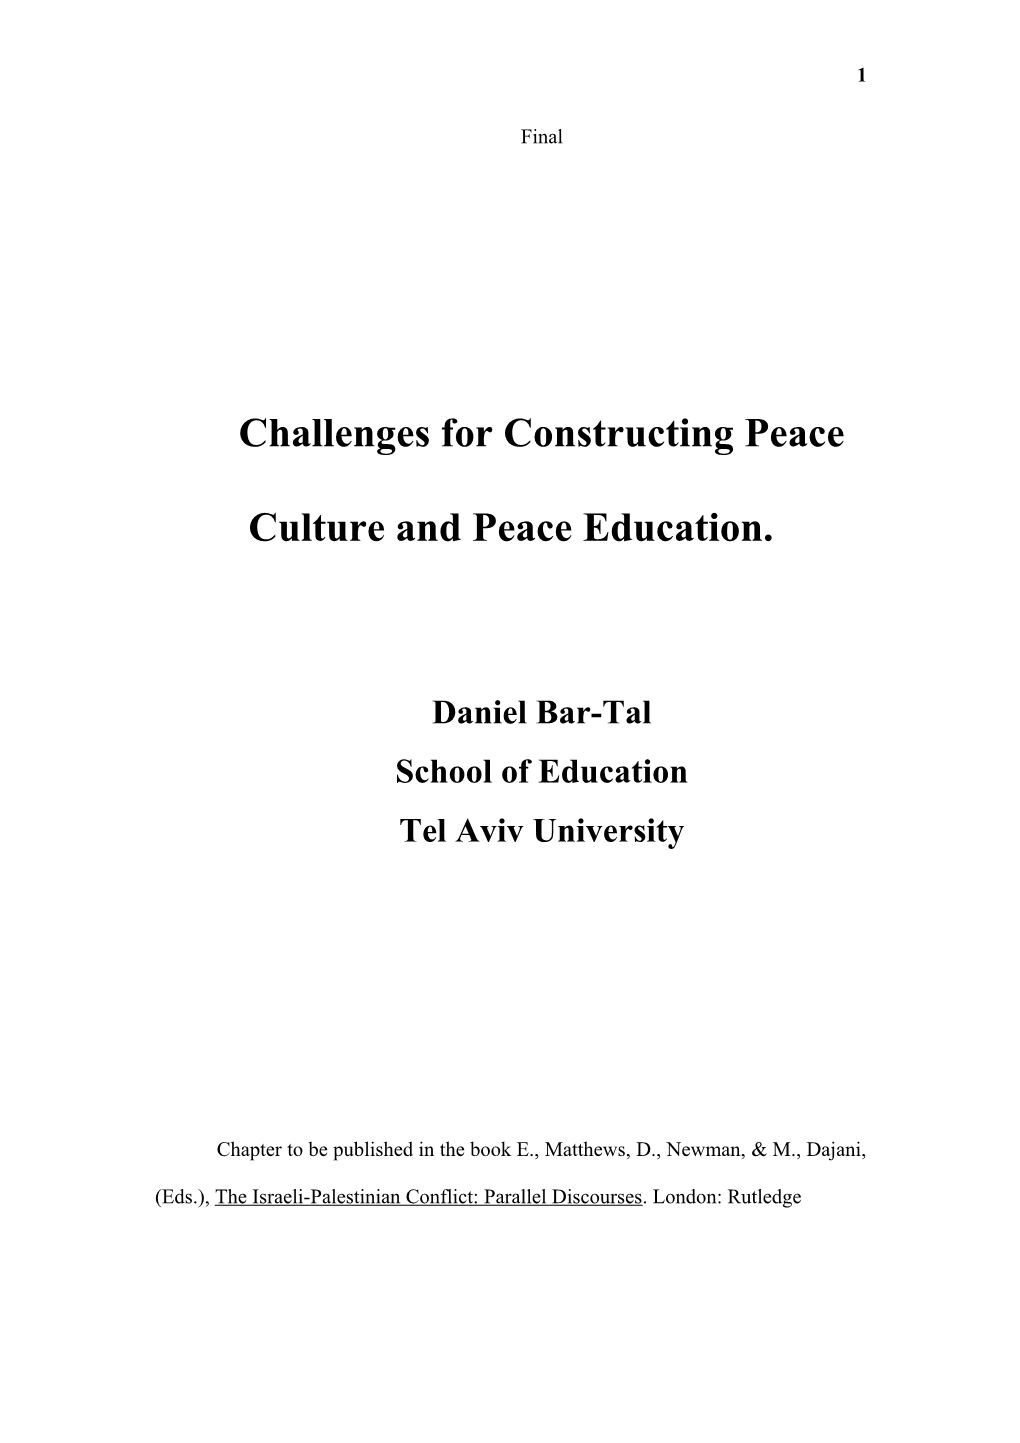 Challenges for Constructing Peace Culture and Peace Education